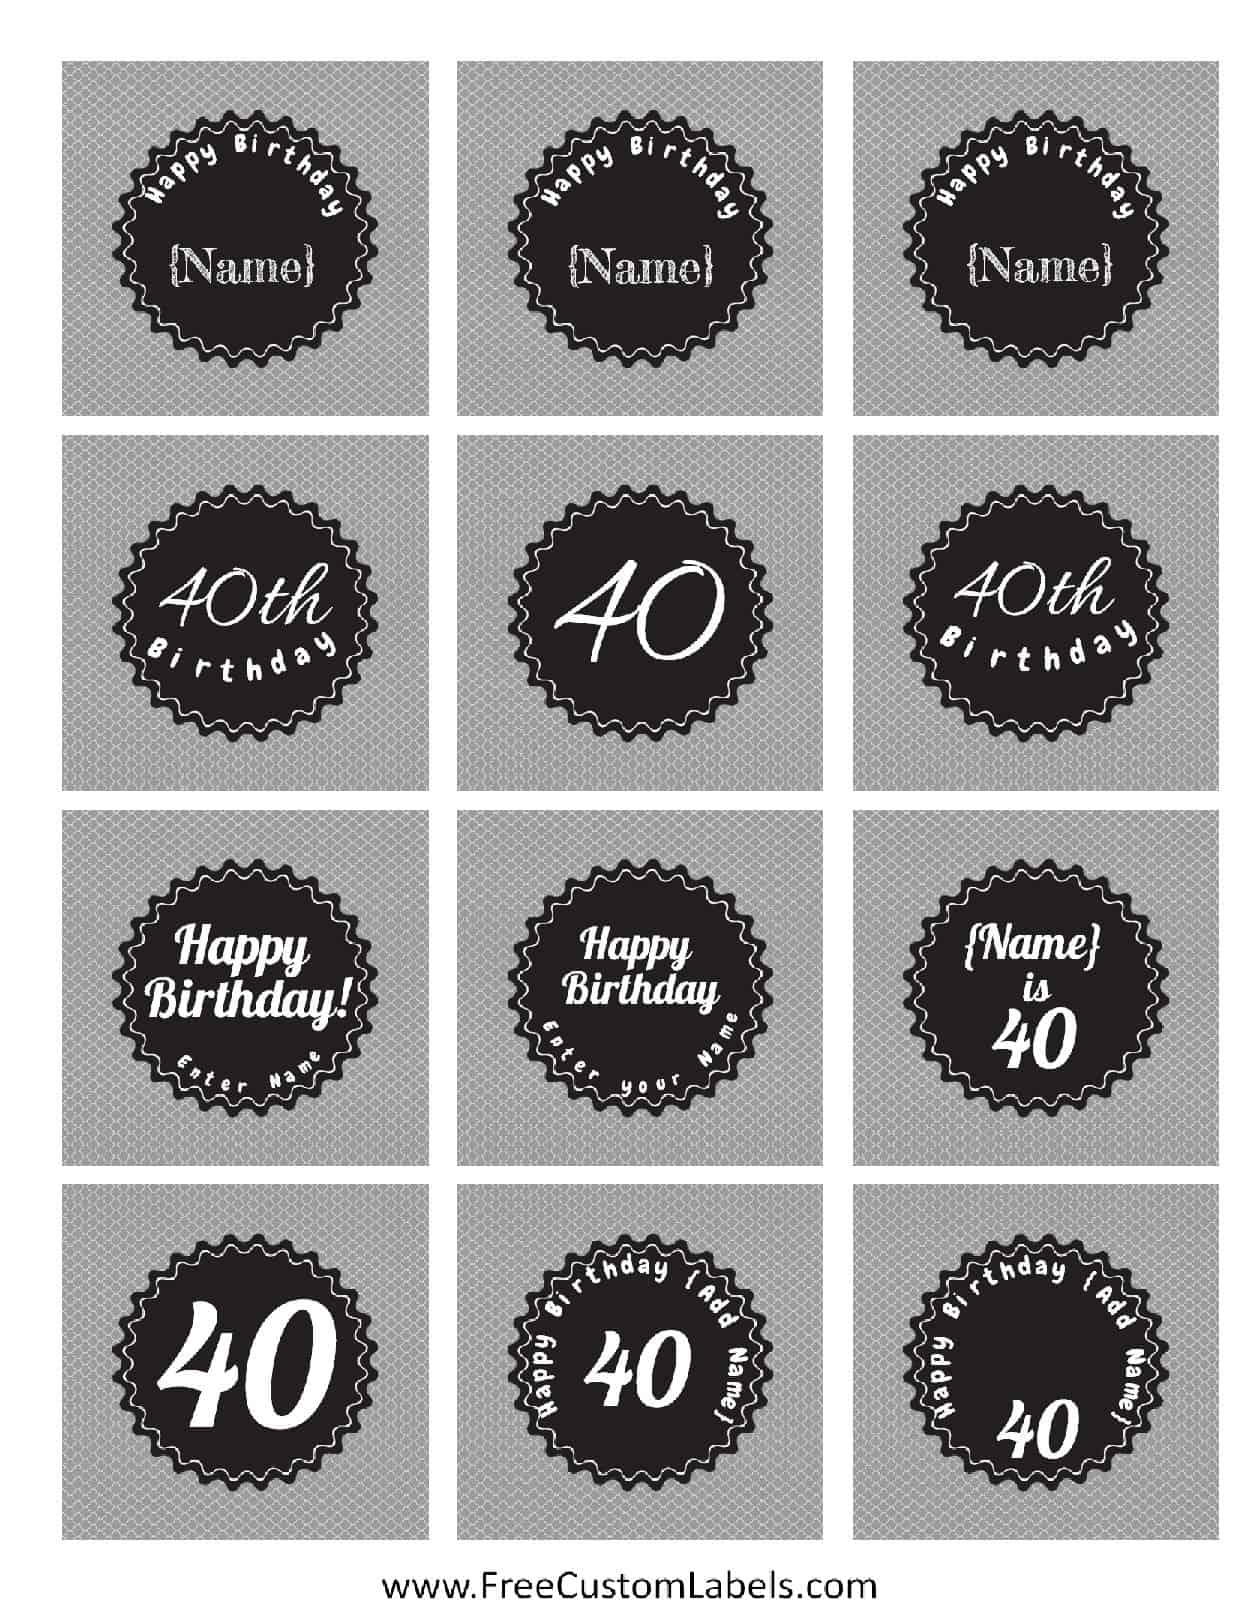 40th Birthday Cupcake Toppers - Free & Customizable